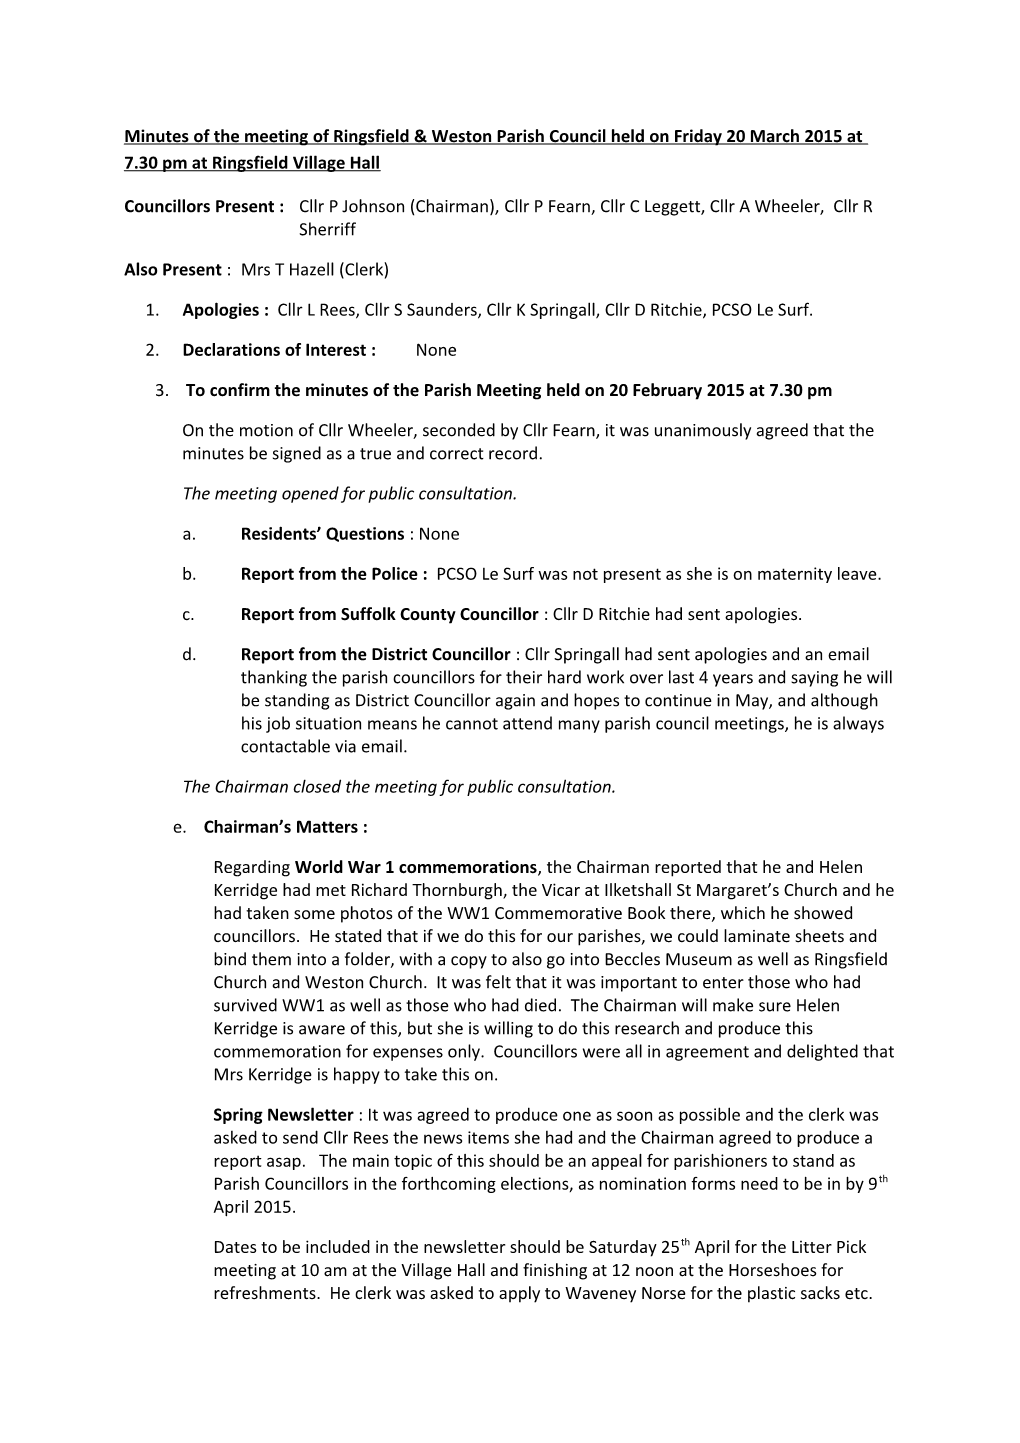 Minutes of the Meeting of Ringsfield & Weston Parish Council Held on Friday 20March 2015